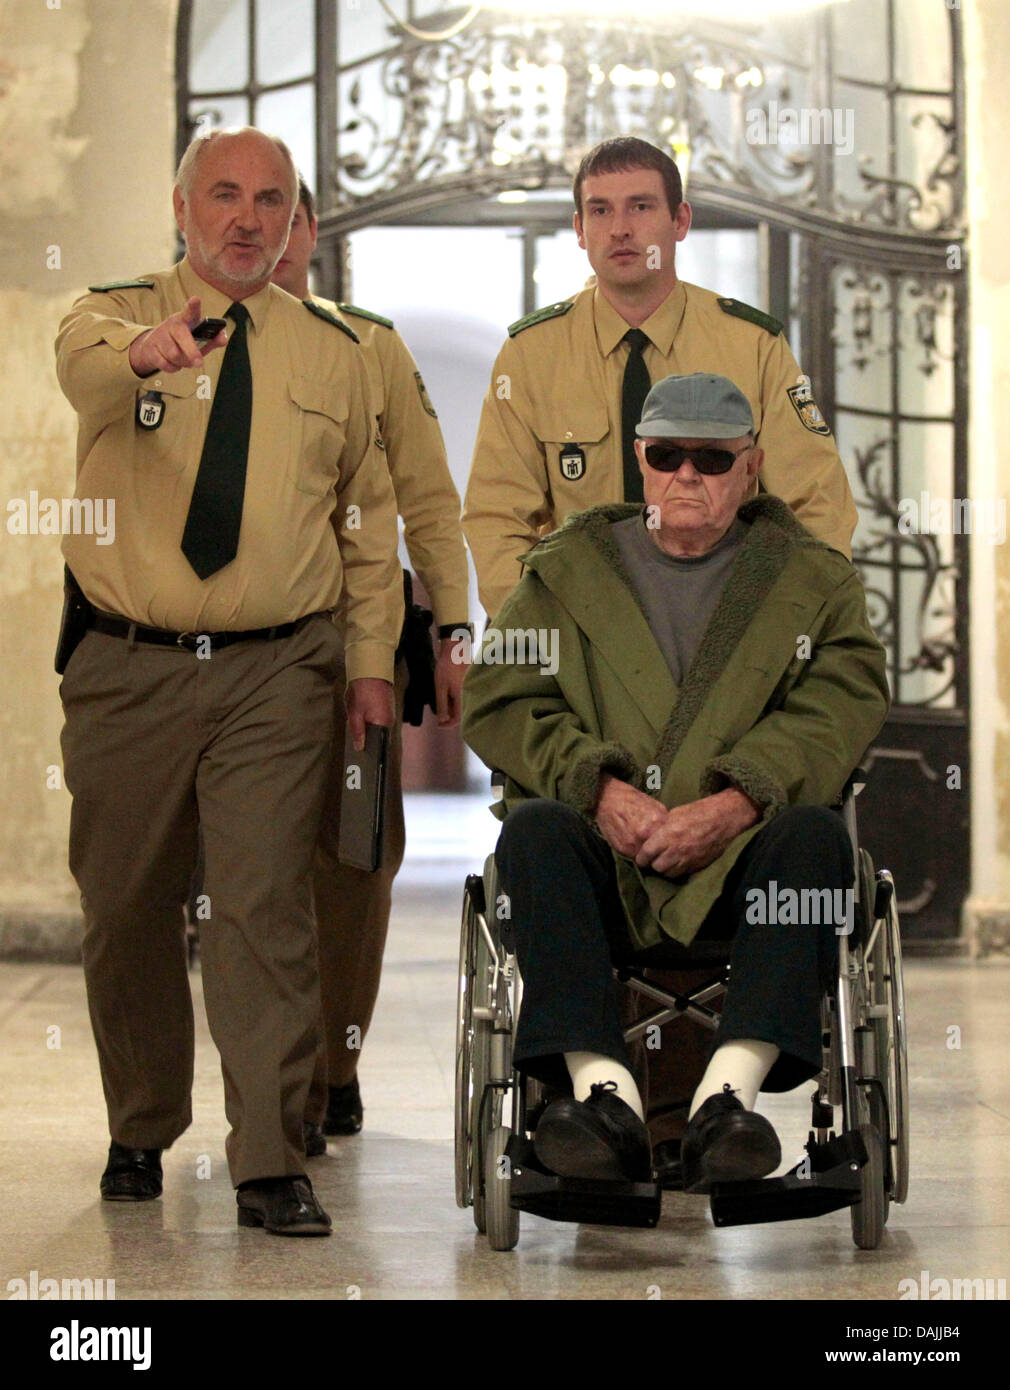 Former concentration camp prisoner/guard (KAPO) John Demjanjuk is escorted to trial in a wheelchair at the state court in Munich, Germany, 14 April 2011. Demjanjuk is charged with 27,900 counts of acting as an accessory to murder, one for each person who died at Sobibor during the time he is accused of serving as a guard at the Nazi death camp. Photo: SEBASTIAN WIDMANN Stock Photo